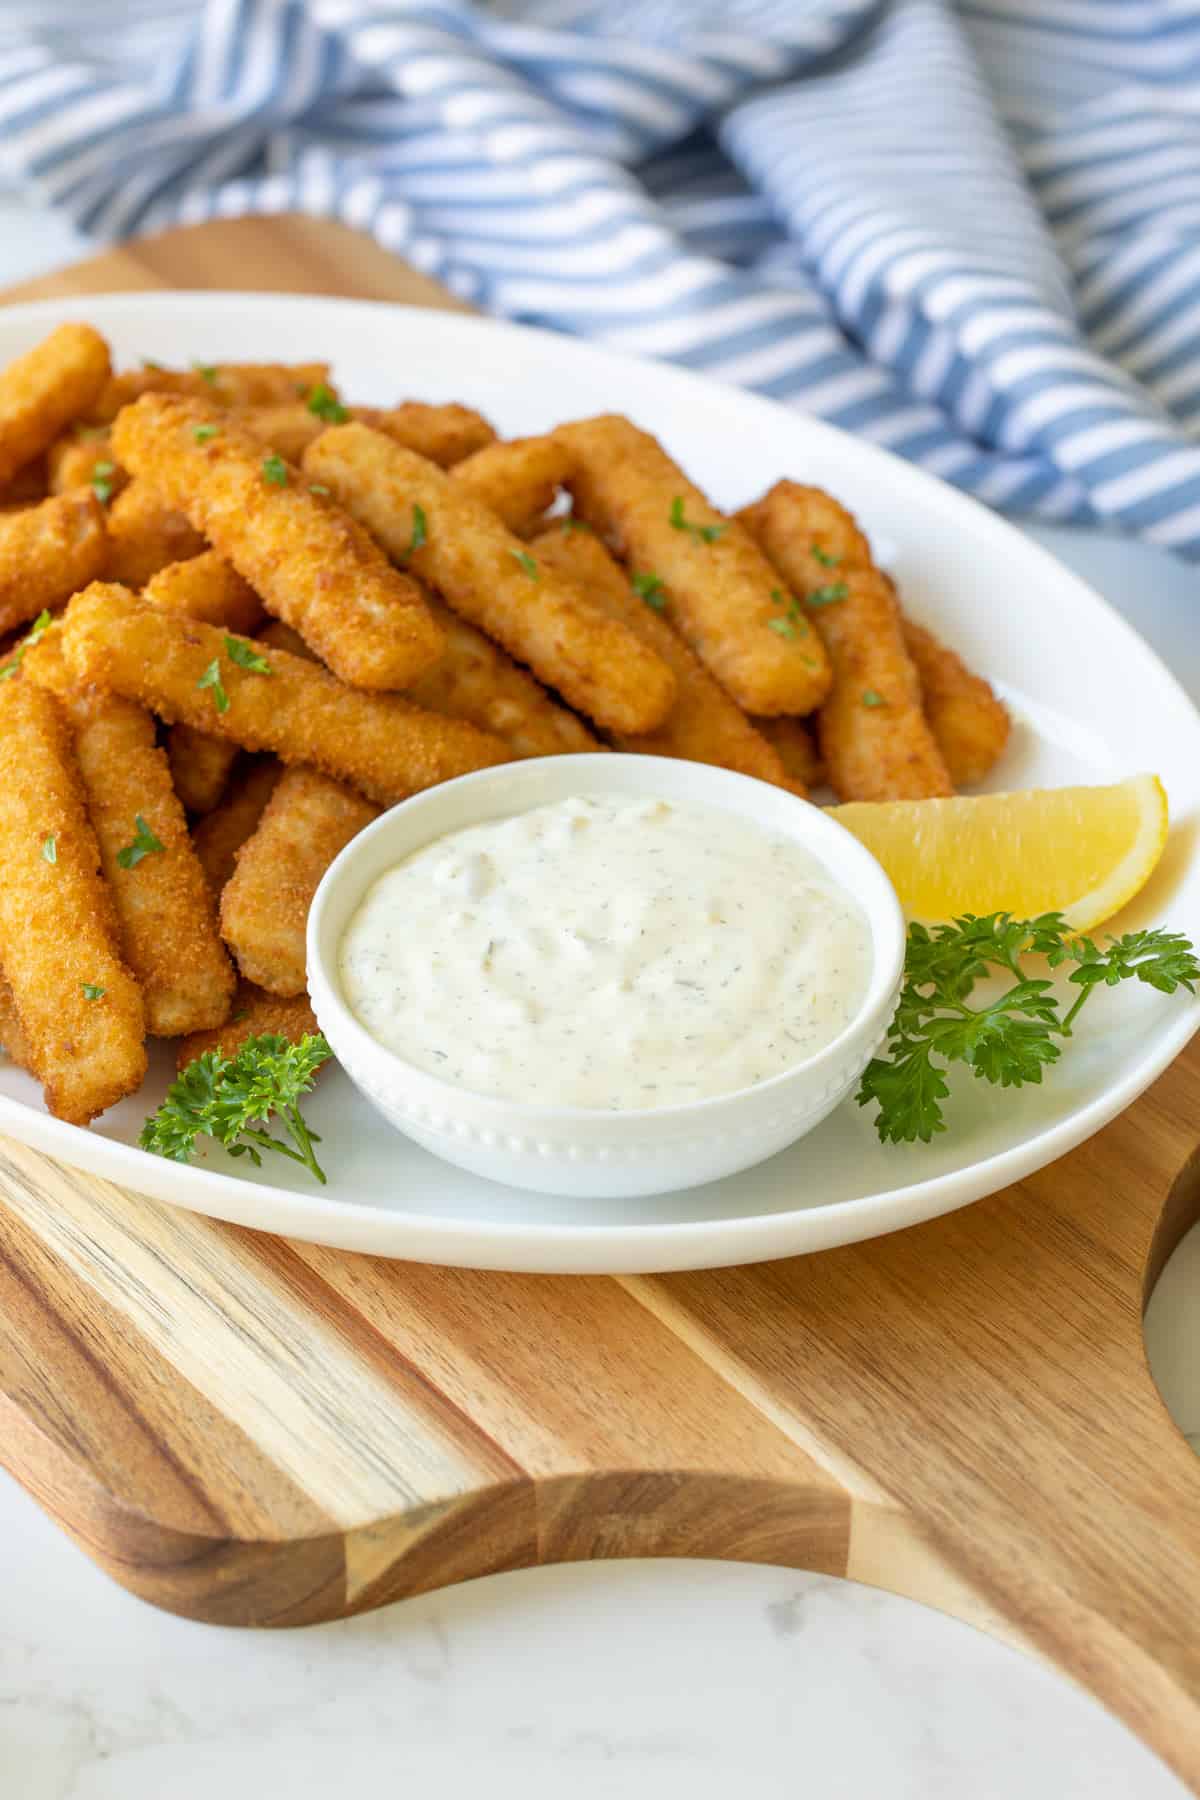 Front view of a bowl of homemade tartar sauce on a white platter with fish sticks.